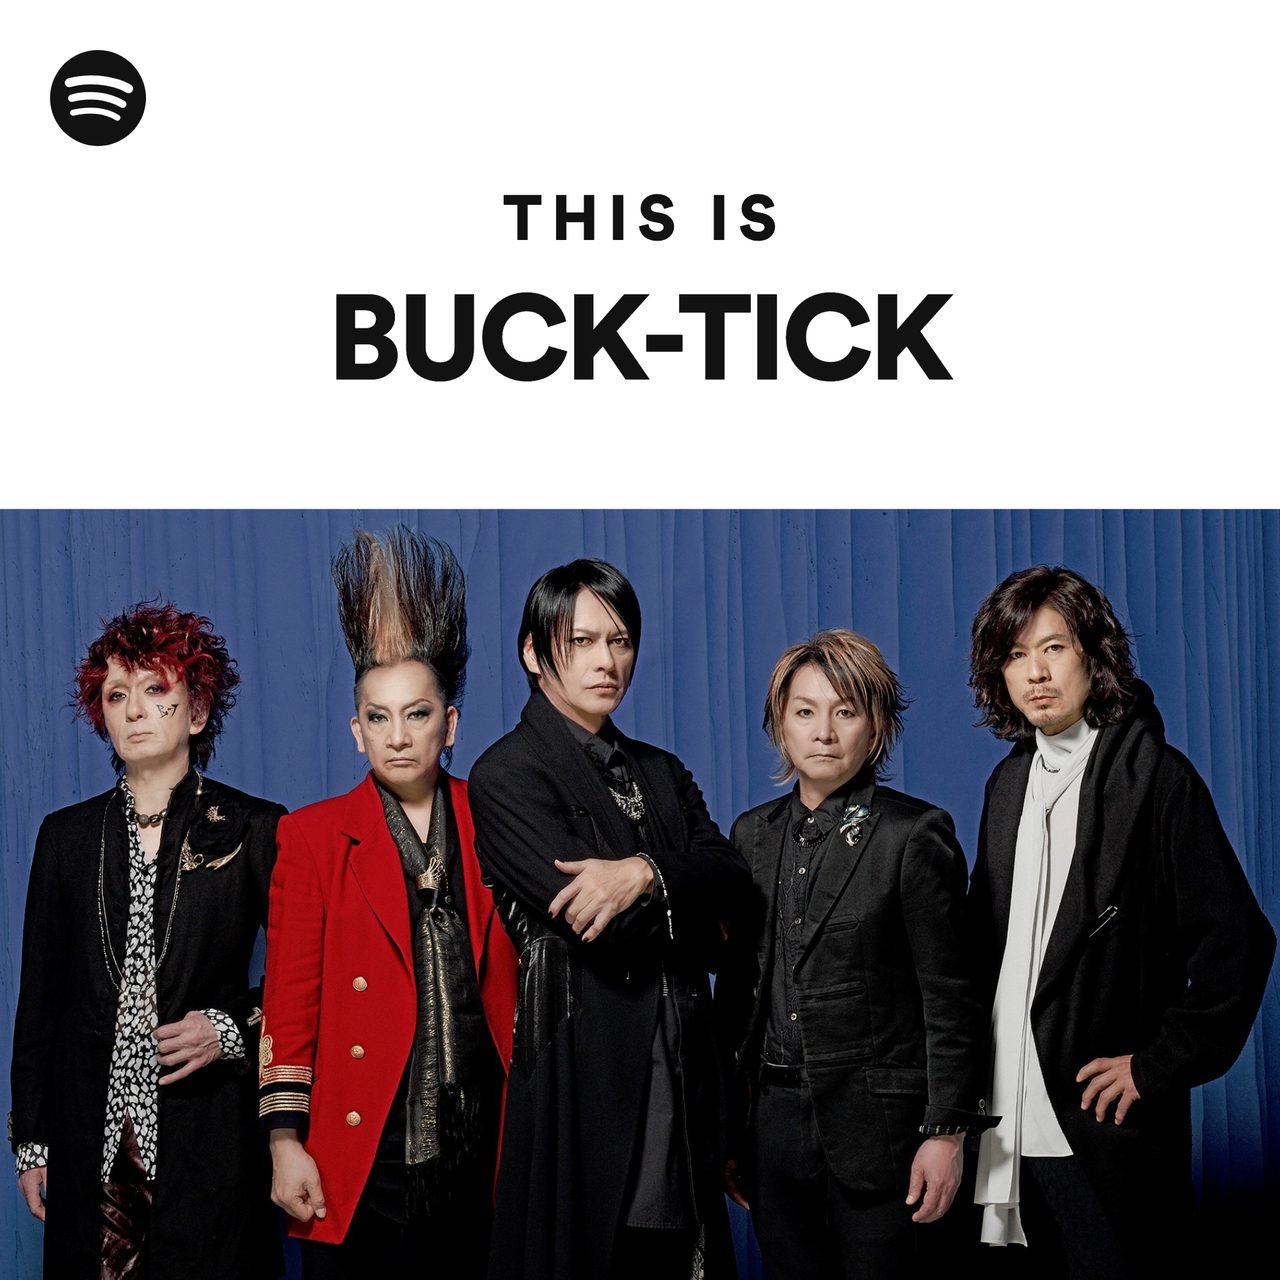 This Is BUCK-TICK - playlist by Spotify | Spotify